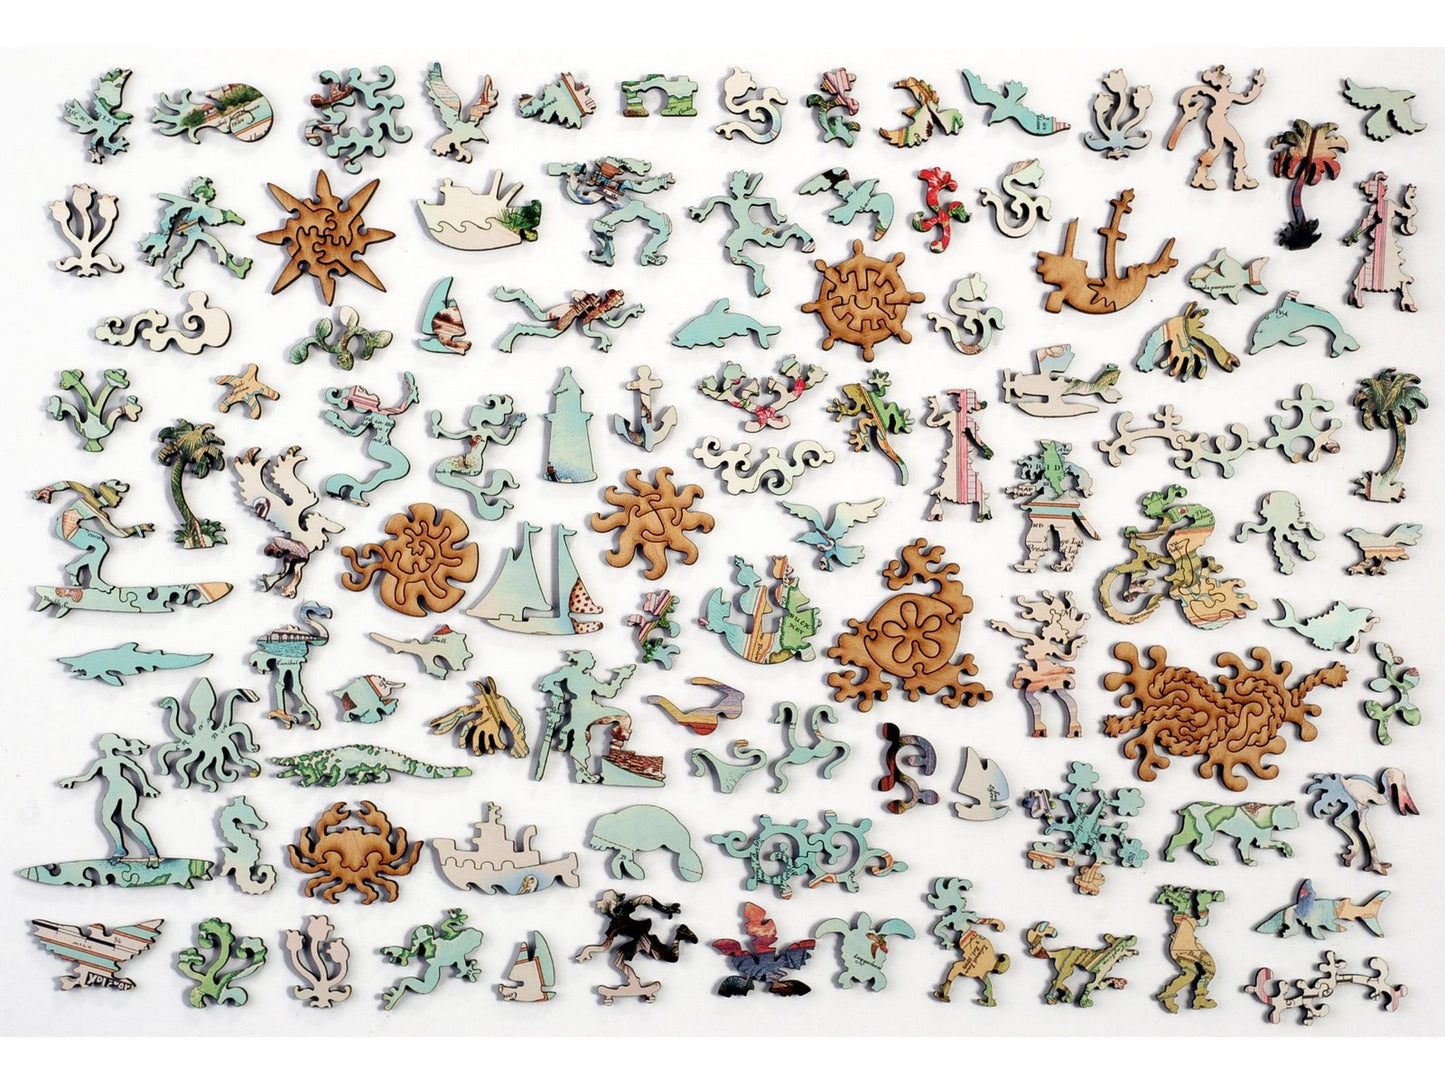 The whimsy pieces that can be found in the puzzle, Captiva and Sanibel Islands.